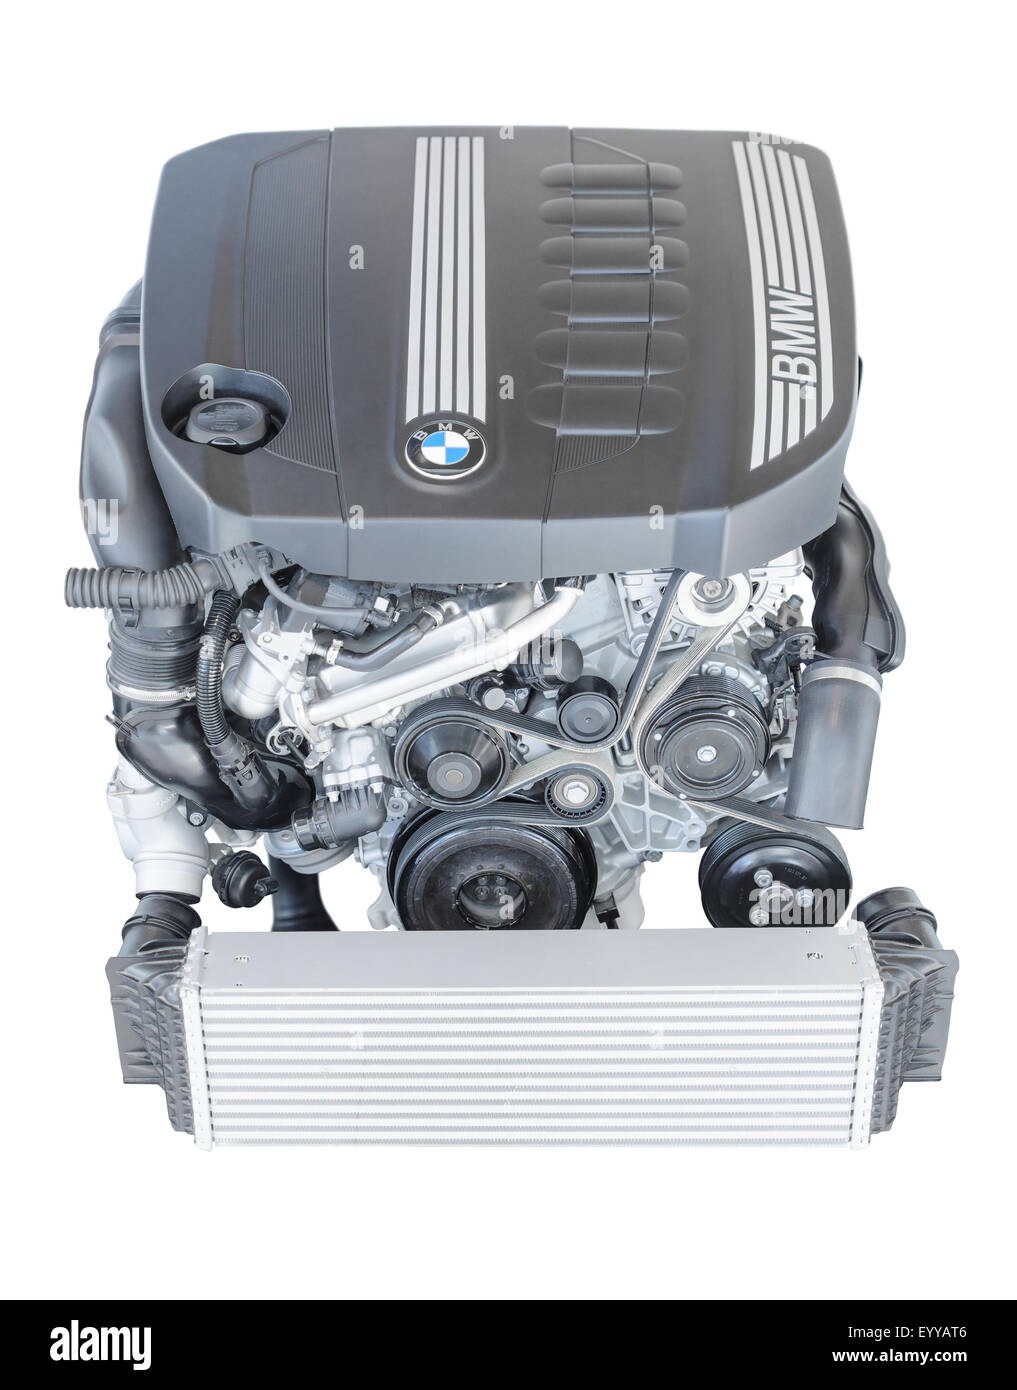 New modern powerful flagship model of car engine. BMW TwinPower turbo 3.0  litre 6-cylinder top-of-the-range diesel power Stock Photo - Alamy